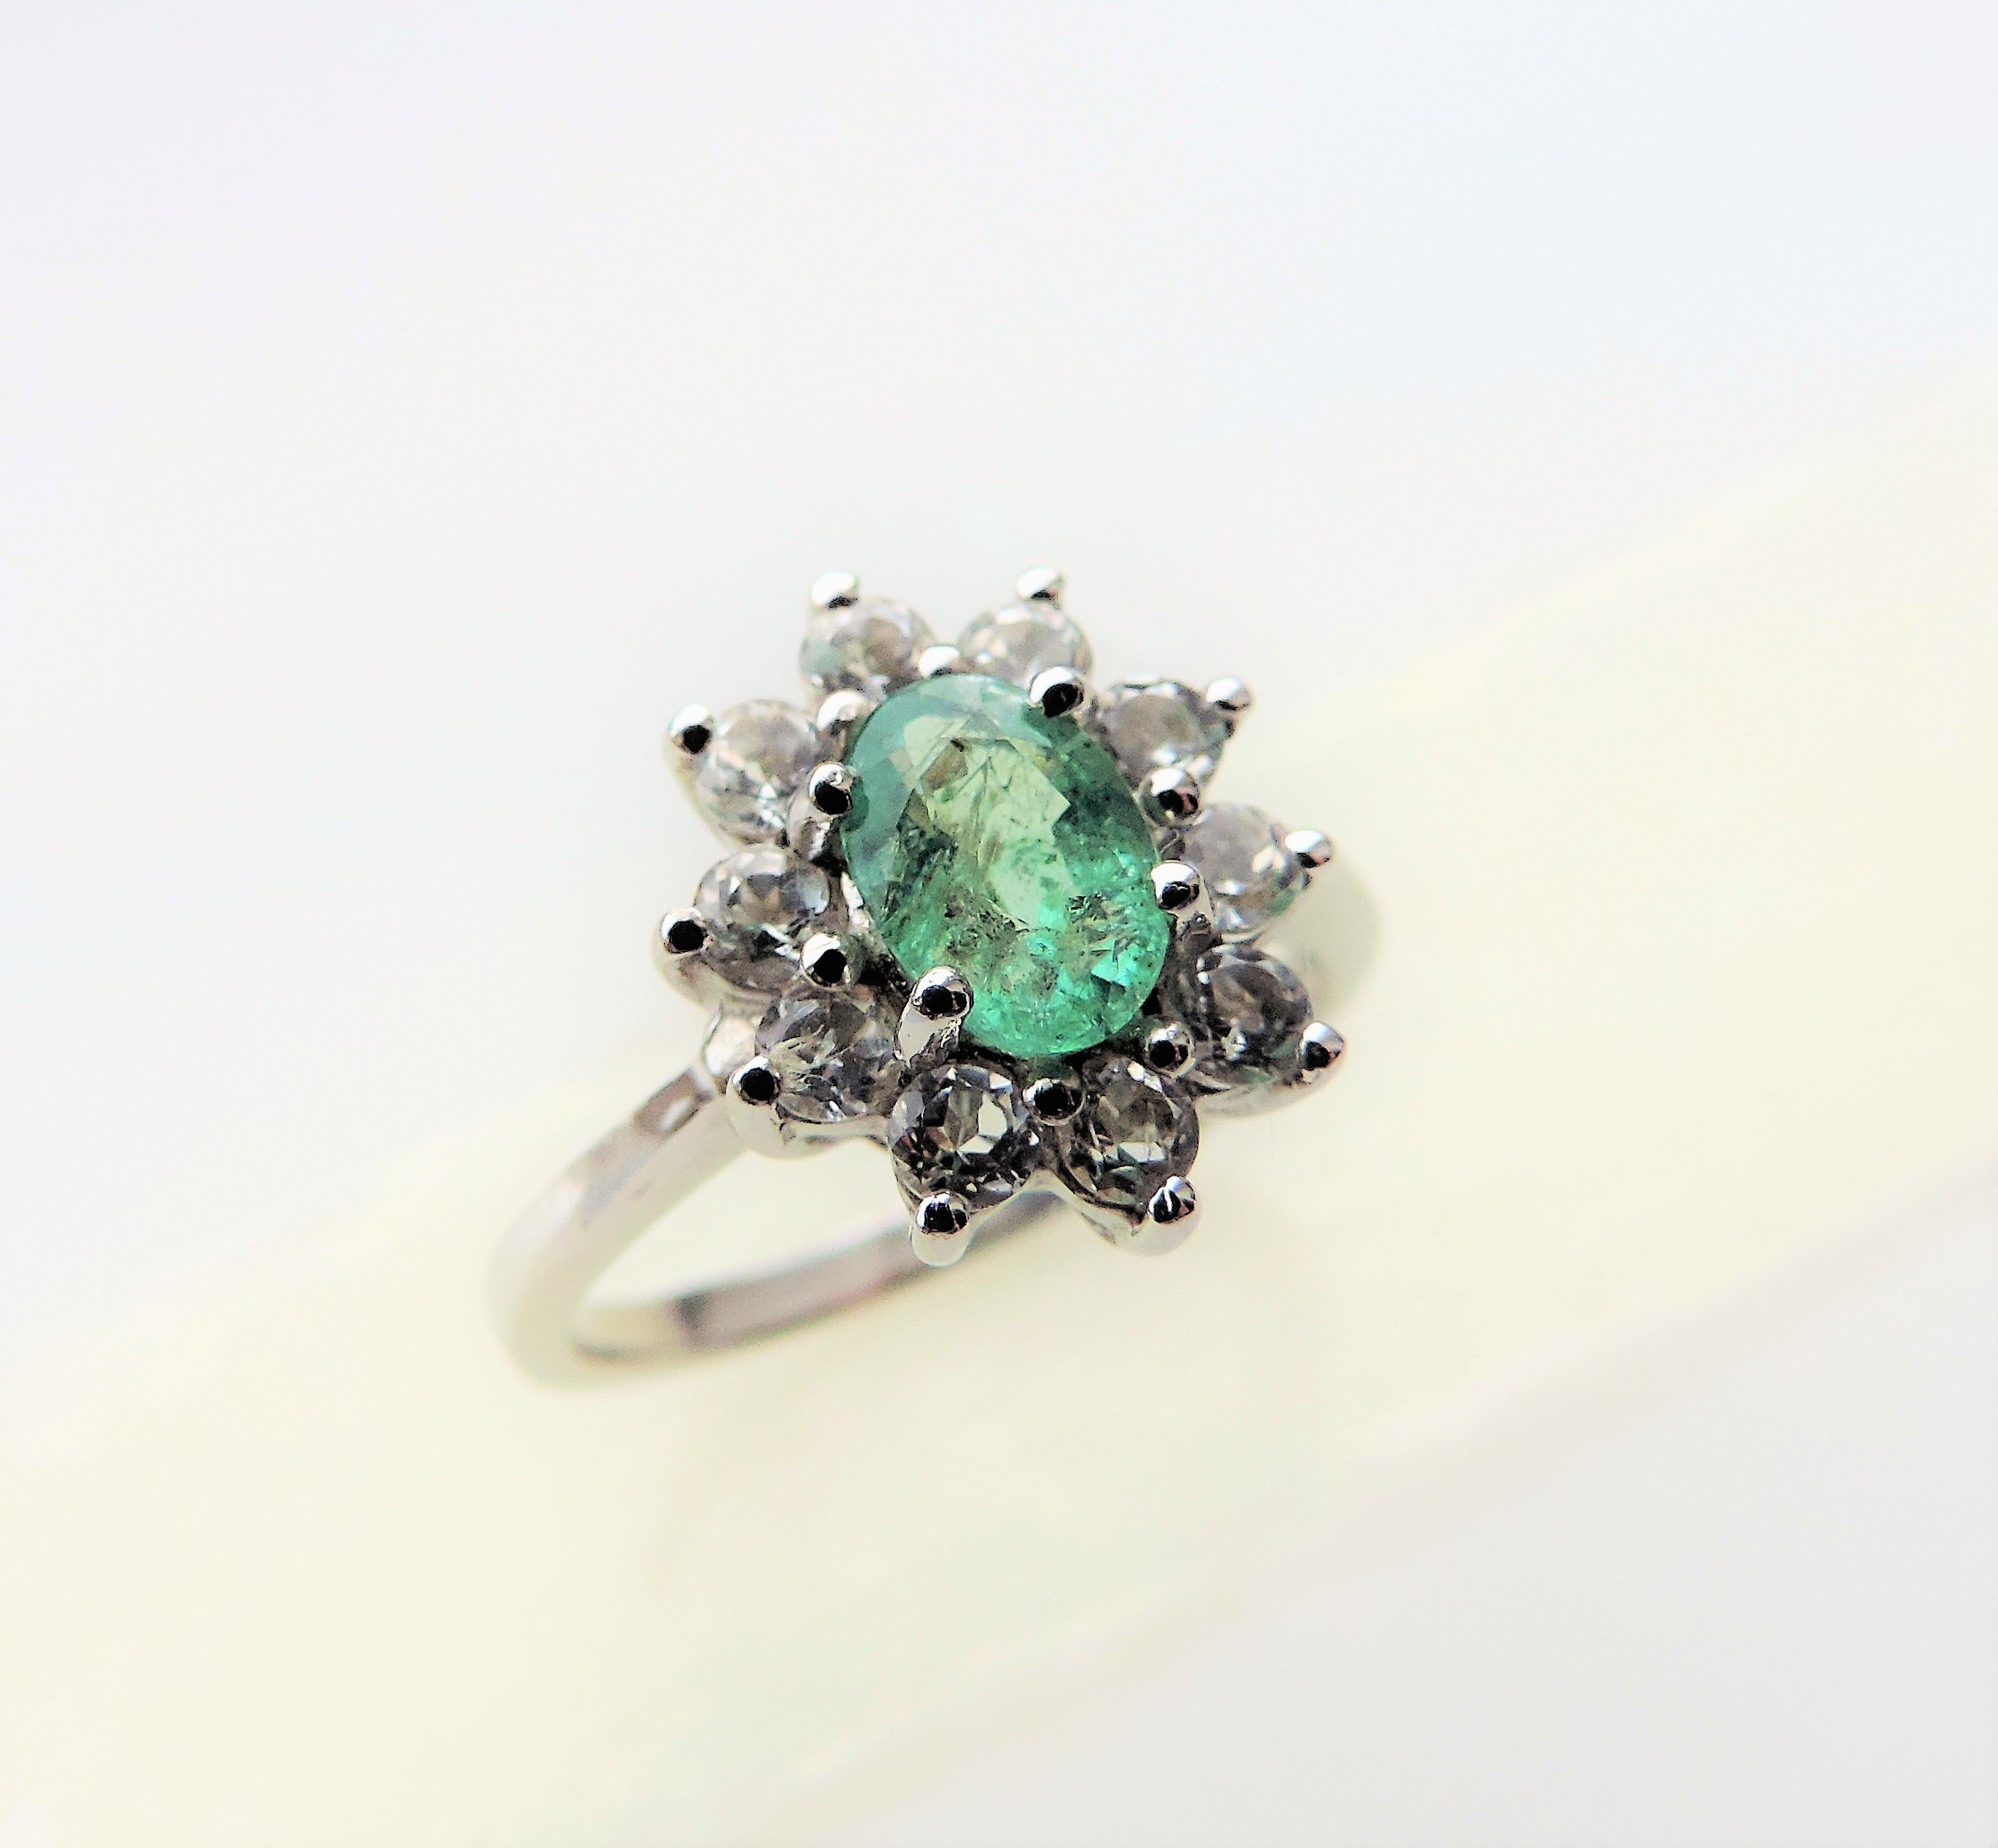 1.5 carat Green and White Topaz Ring - Image 2 of 6